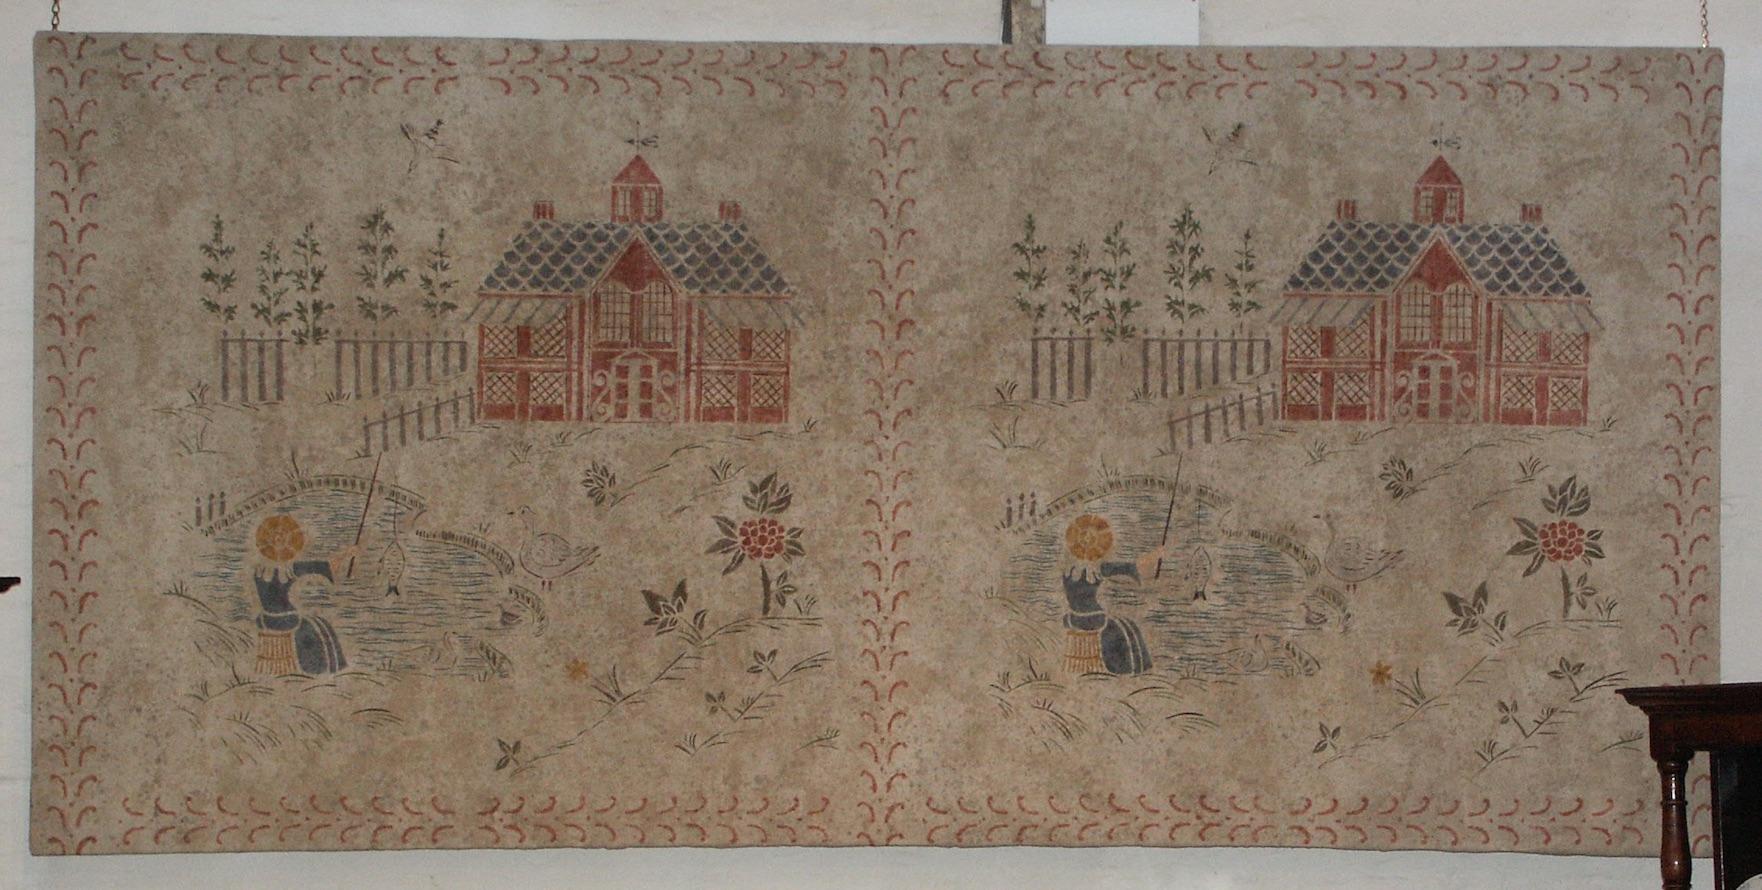 Painted cloths were fashionable wall-hangings in the 17th century as they much cheaper than tapestries and woven textiles. Very few survive from this period and there was a revival of interest and popularity in them in the late 19th and early 20th